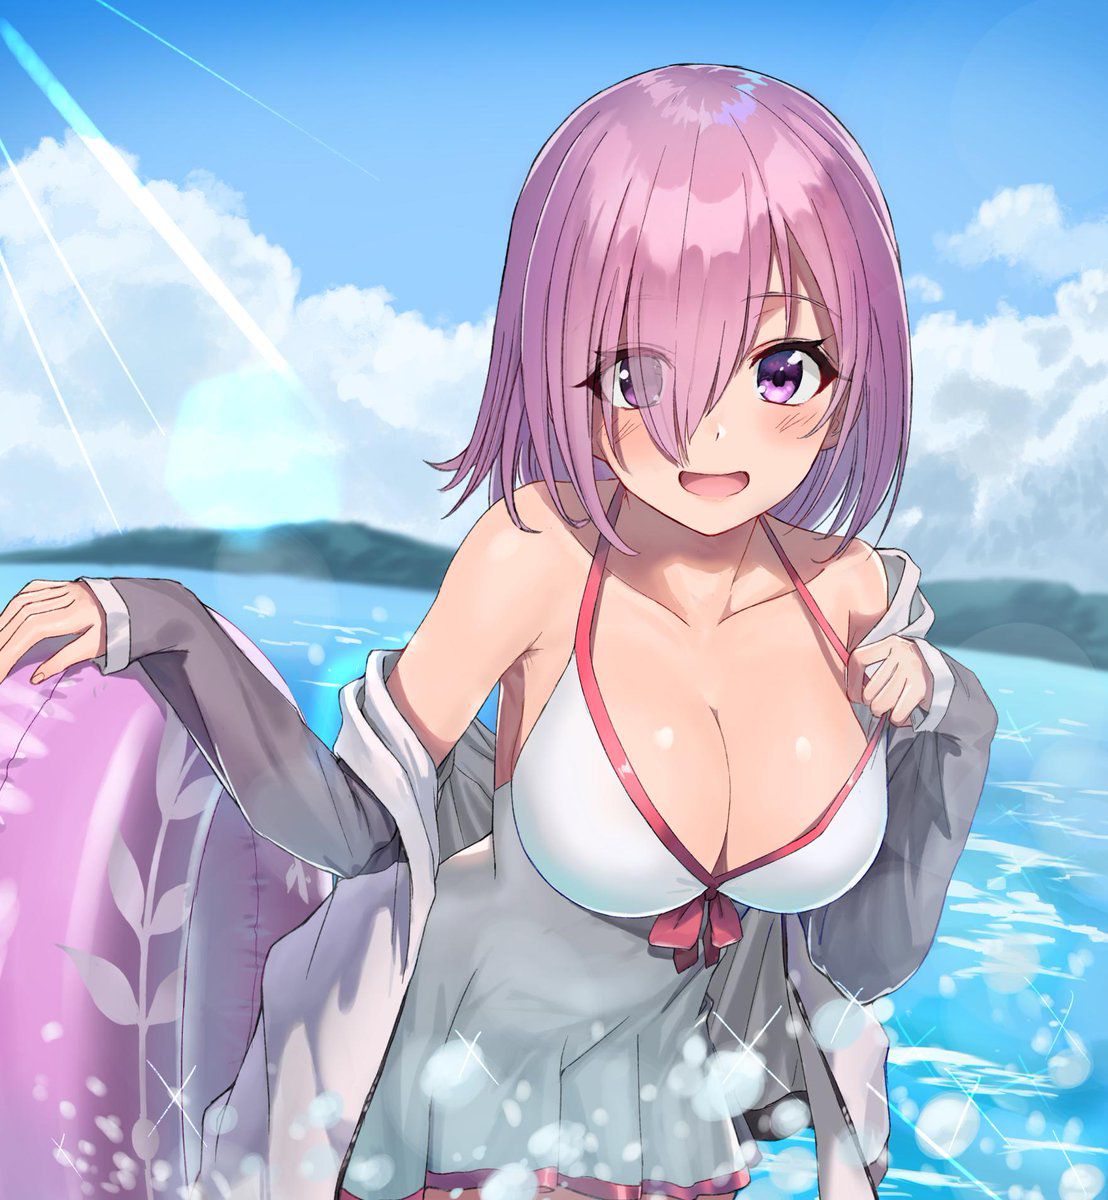 Fate Grand Order has been collecting images because it is not erotic 16